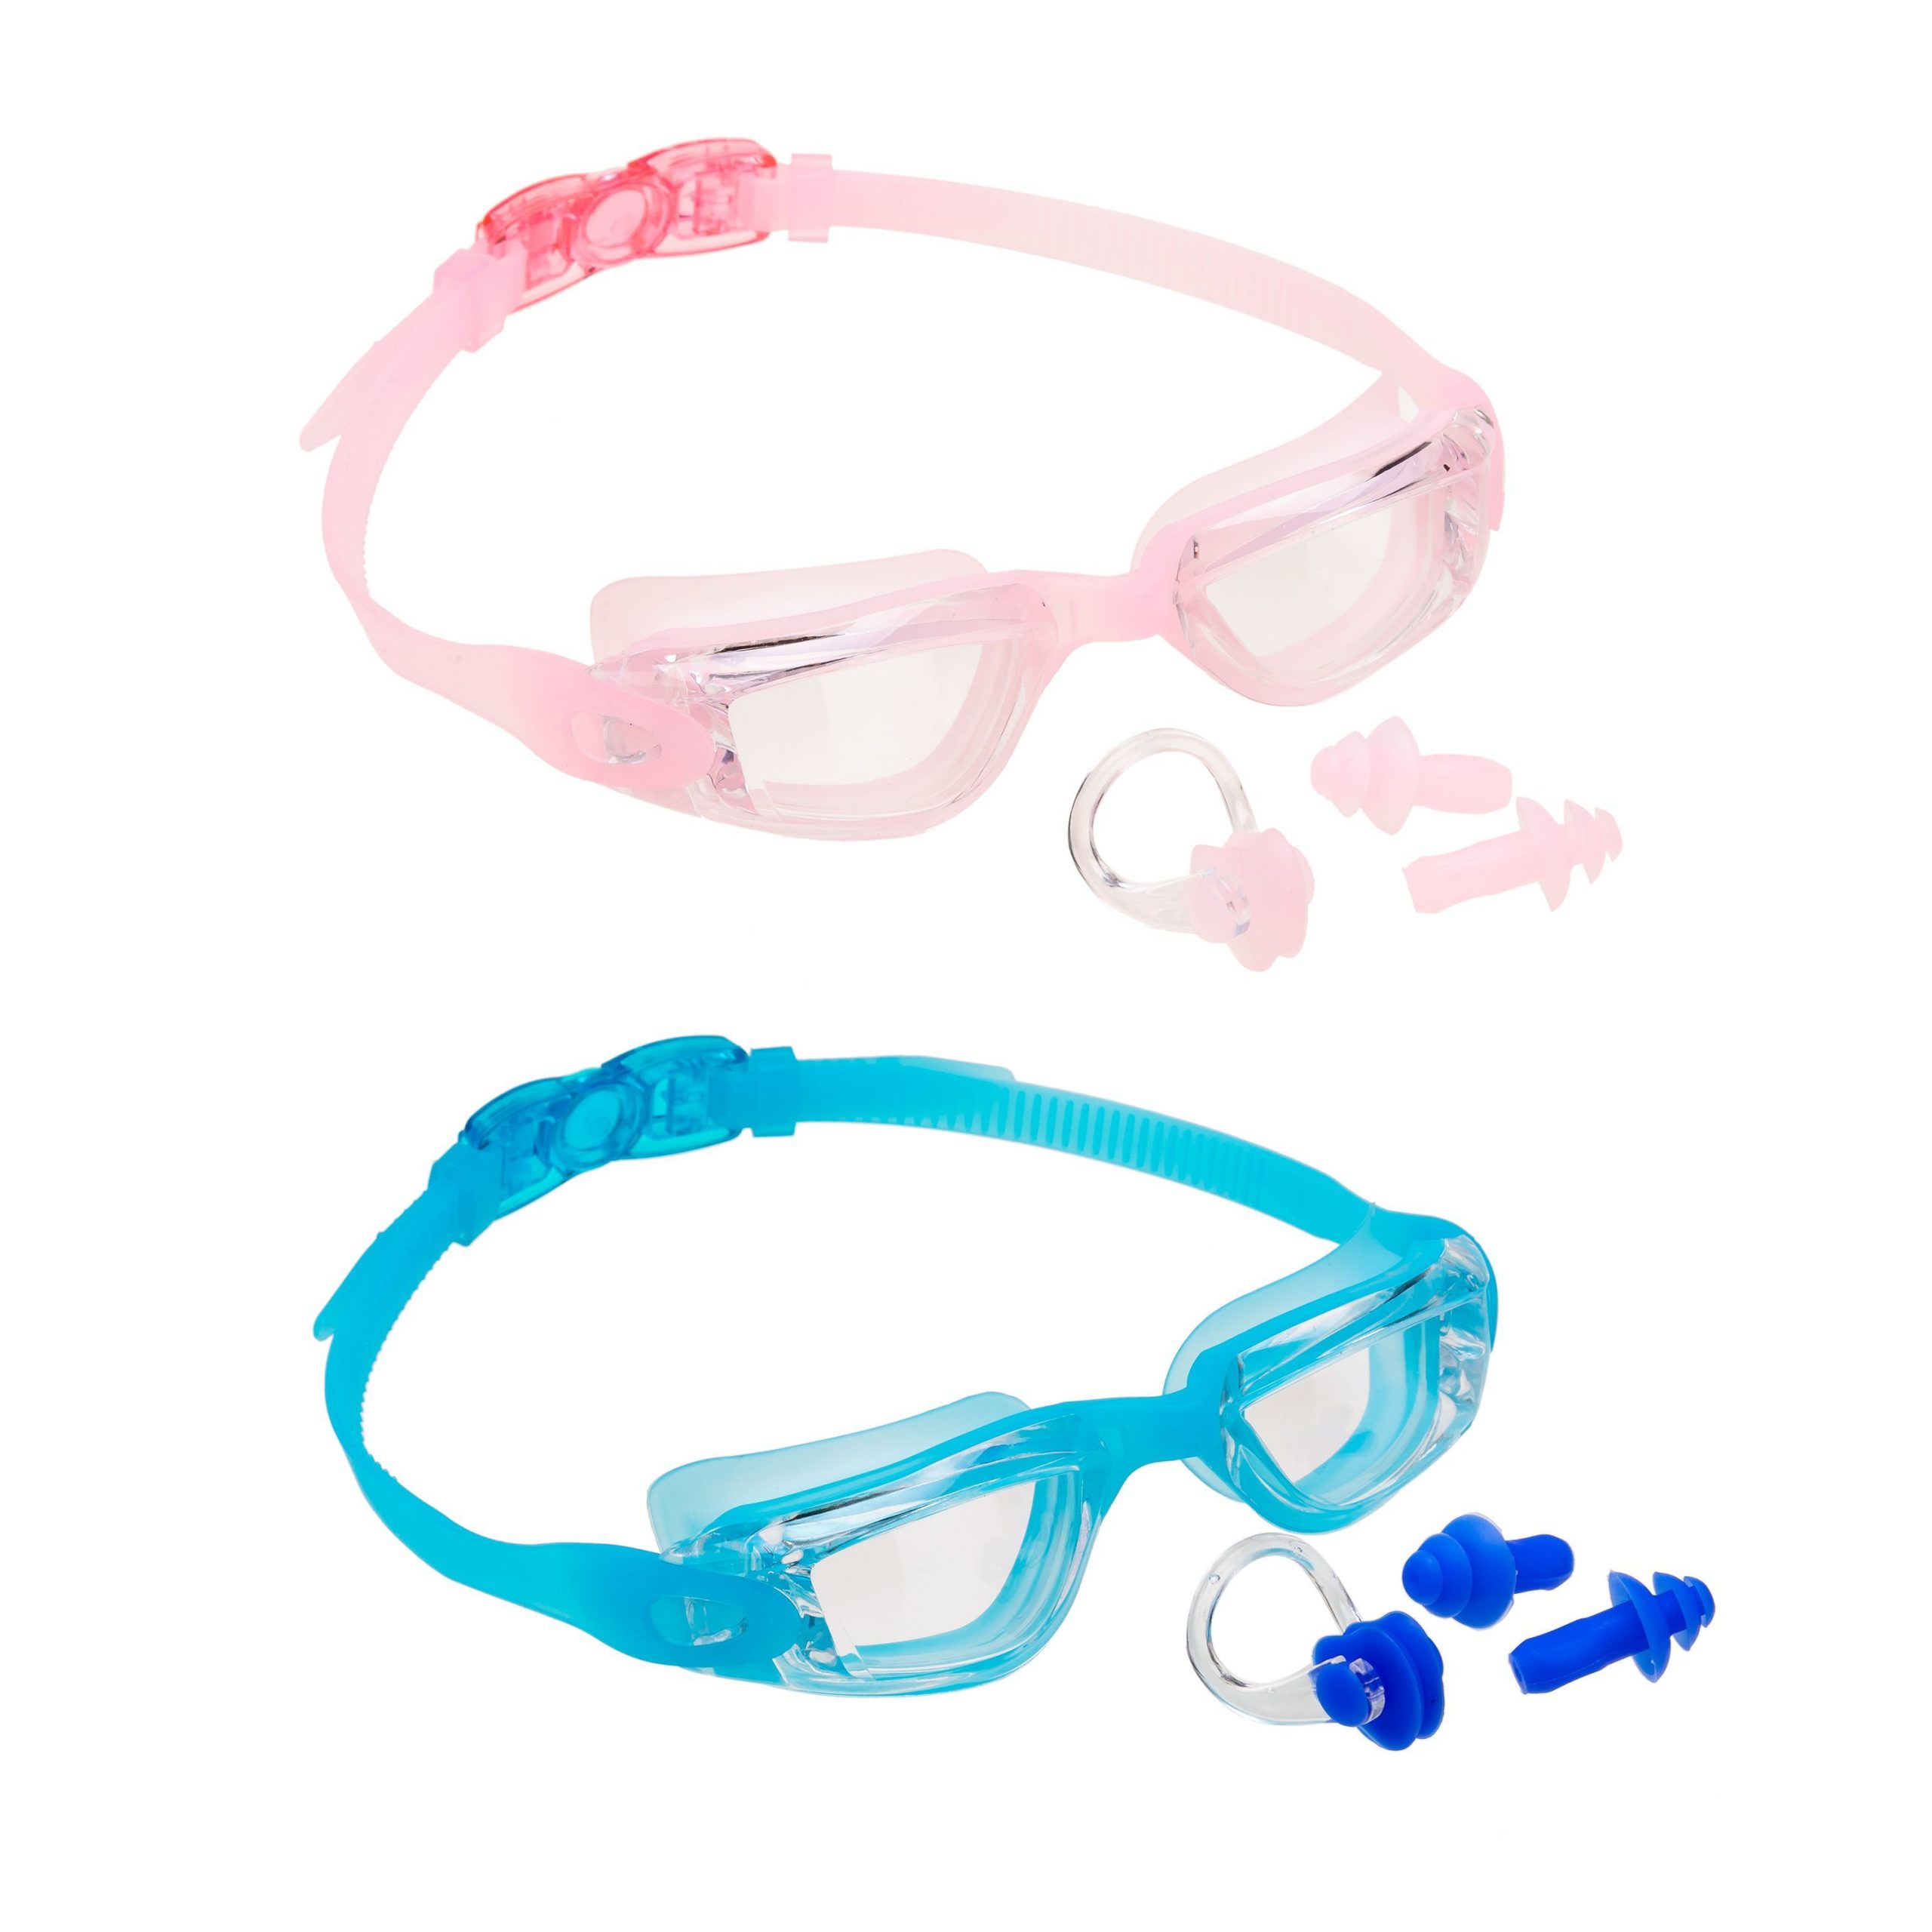 2 Pack Kids Swimming Goggles (Blue & Pink)